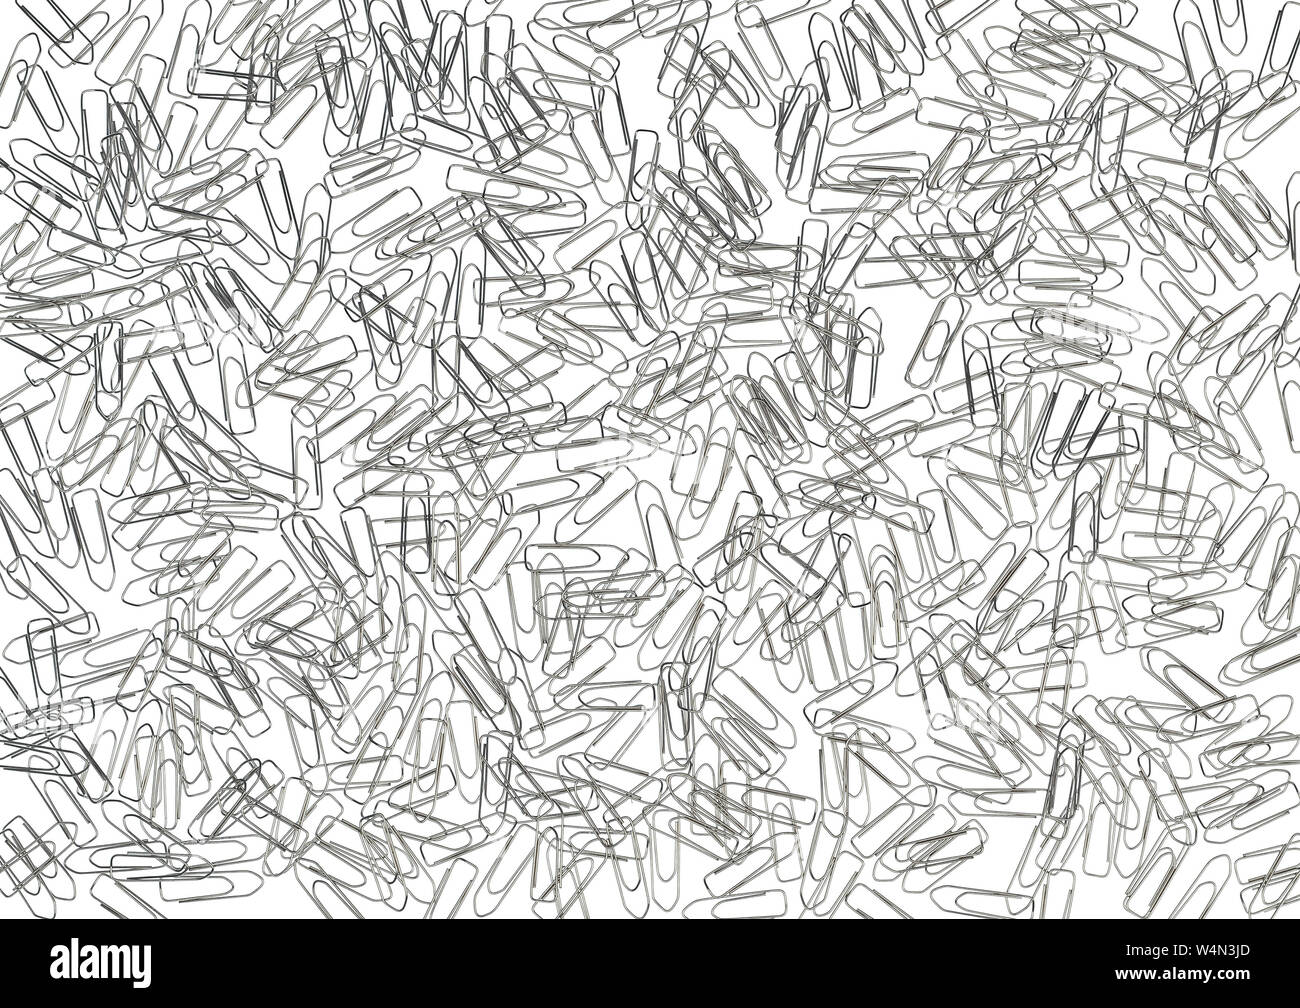 background made up of lots of metal paper clips Stock Photo